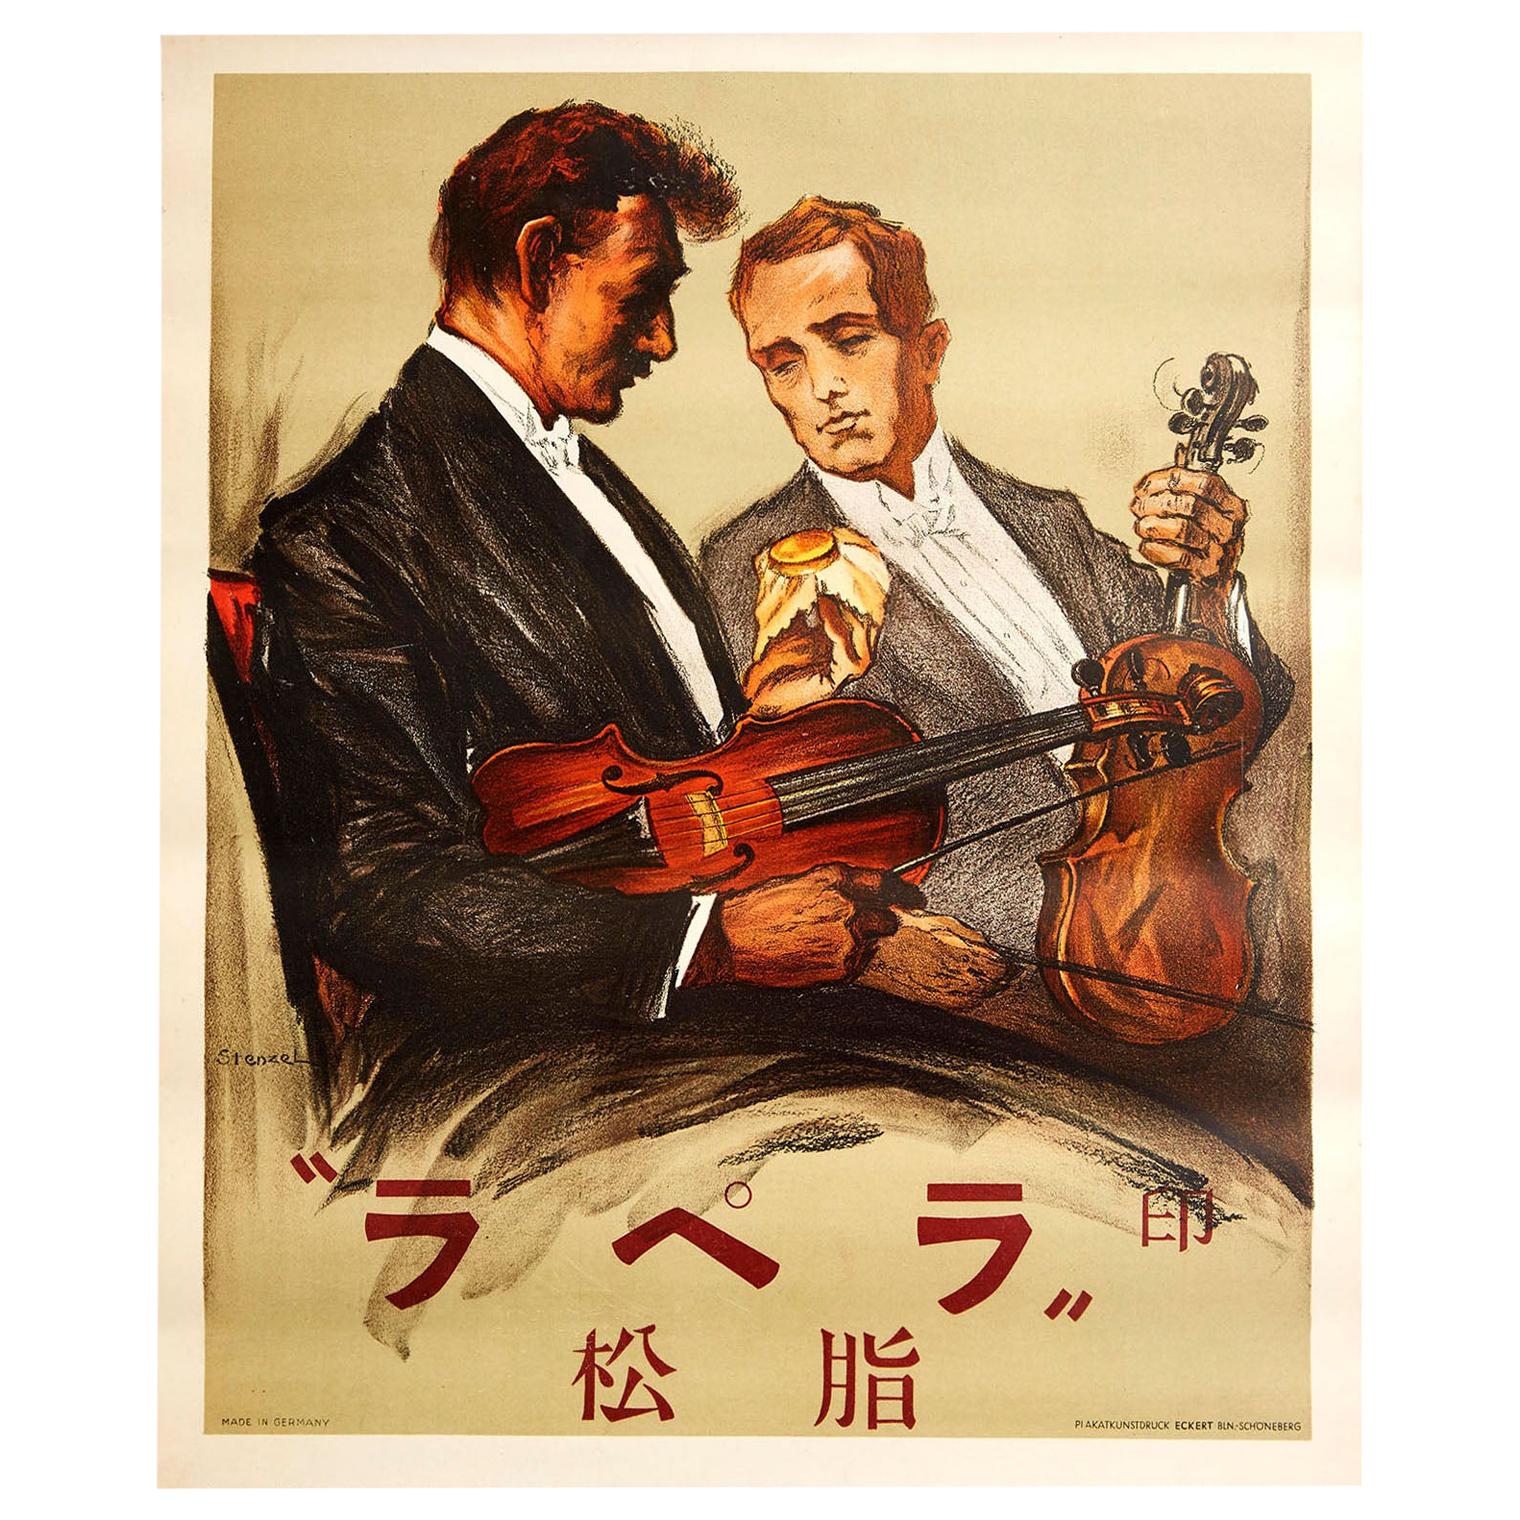 Original Vintage Poster Wood Wax Violin Classical Music Concert Art Japanese Ad For Sale